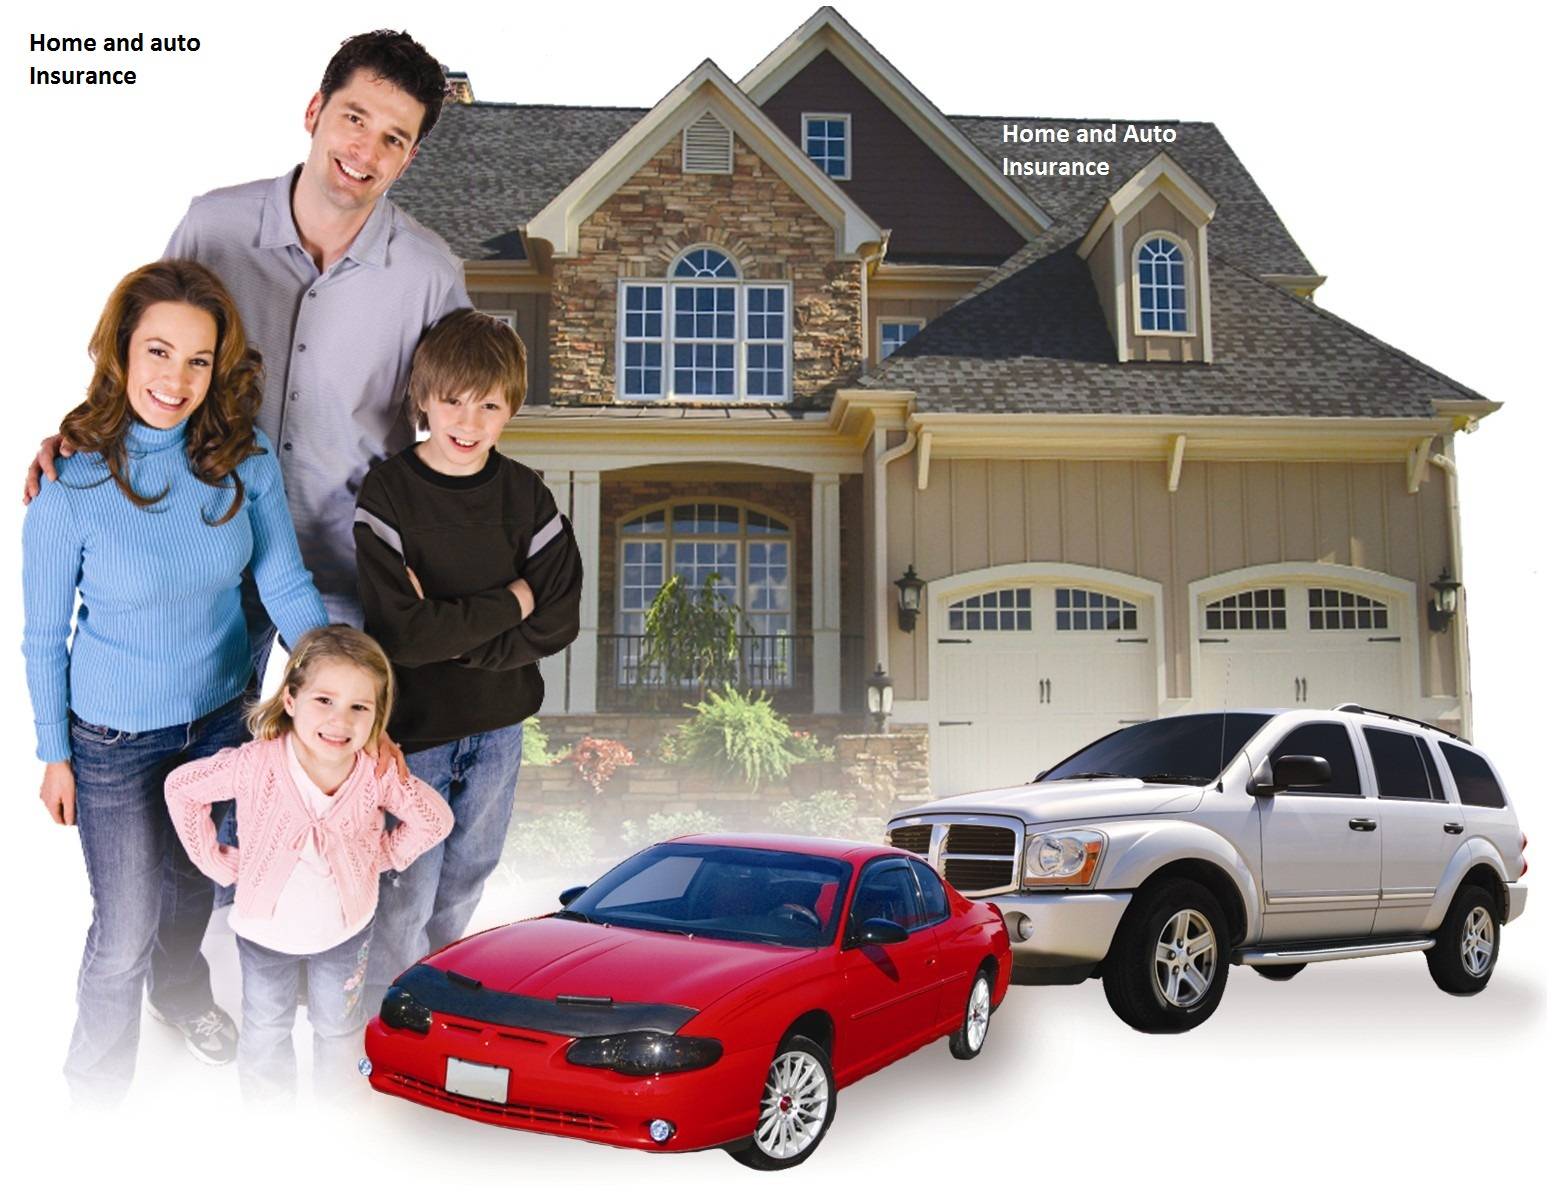 5 Reasons To Be Thankful for Home & Auto Insurance